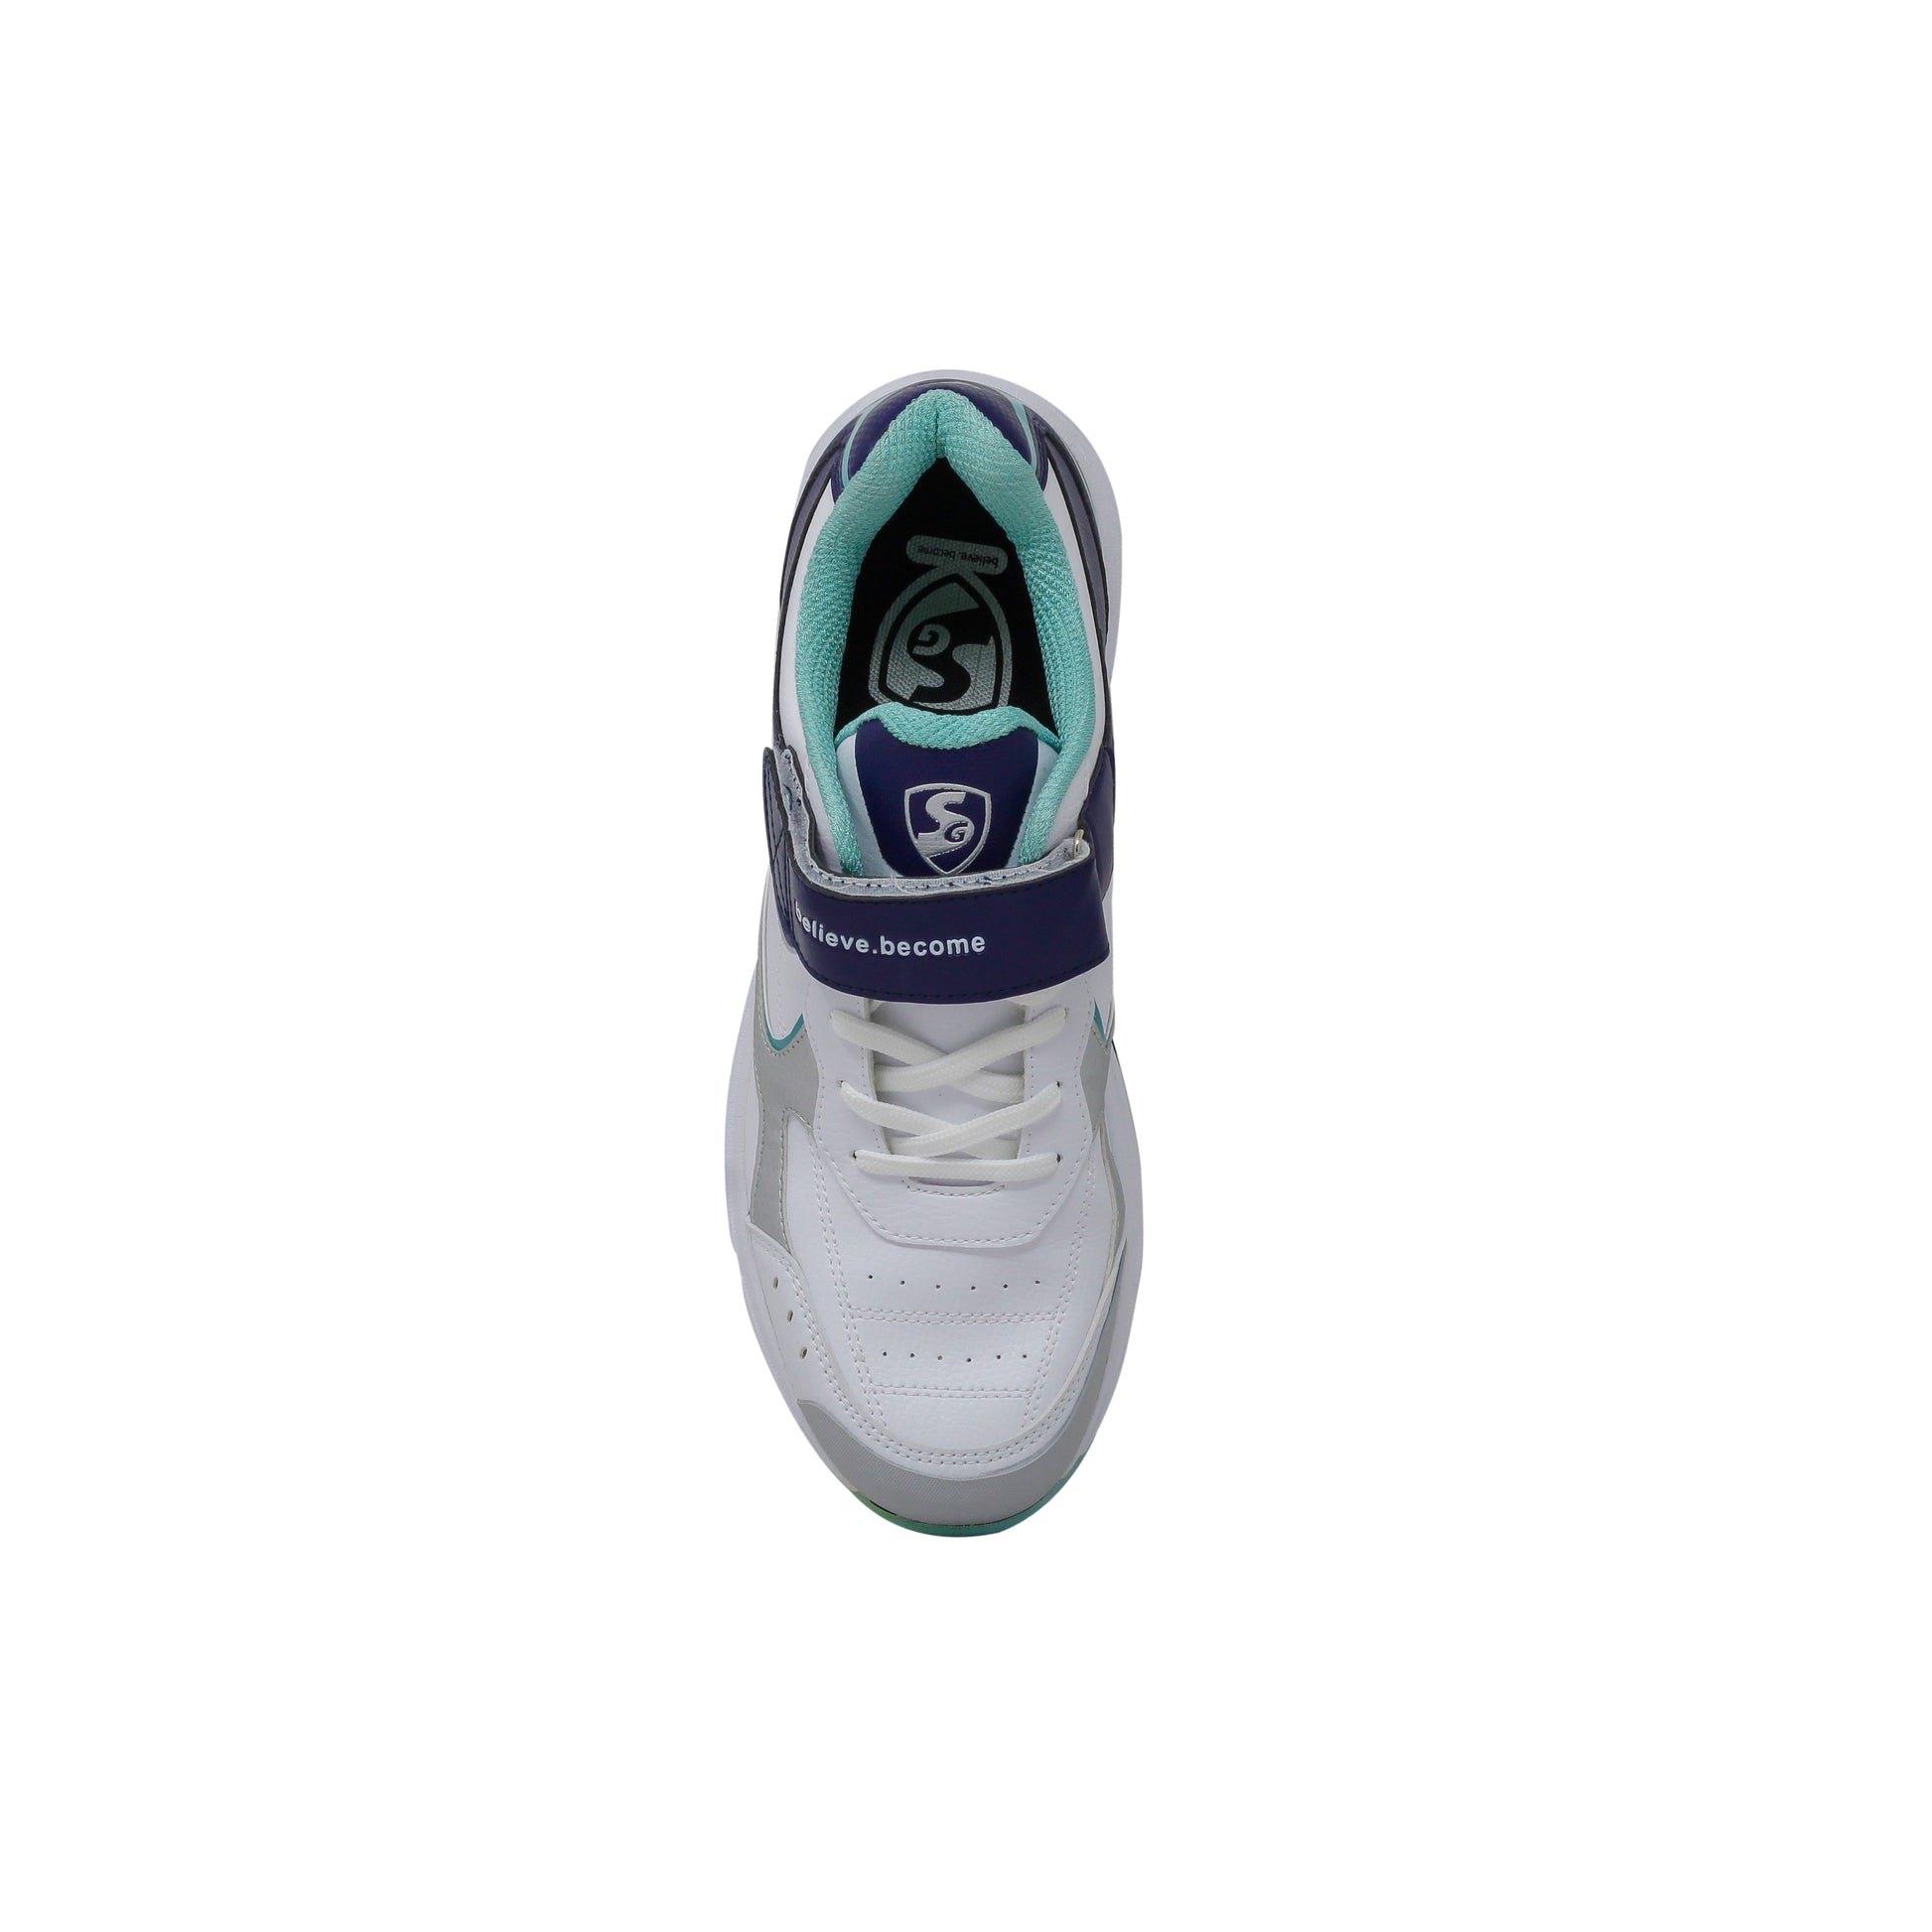 SG ARMOUR STUD Cricket Shoes in White/Navy/Teal – Your Ultimate Cricket Companion